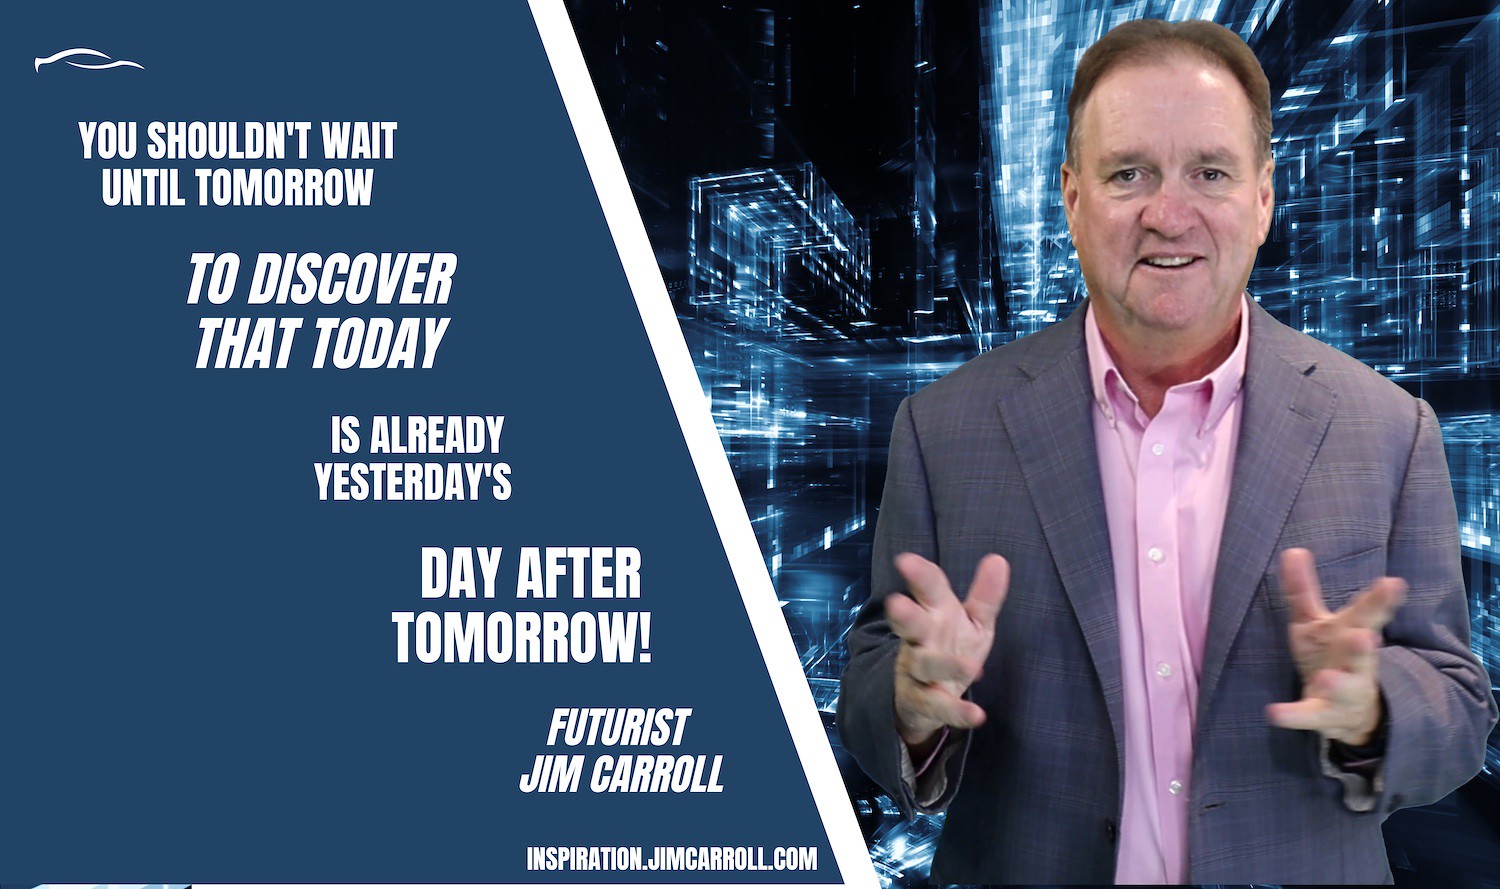 "You shouldn't wait until tomorrow to discover that today is already yesterday's day after tomorrow!" - Futurist Jim Carroll